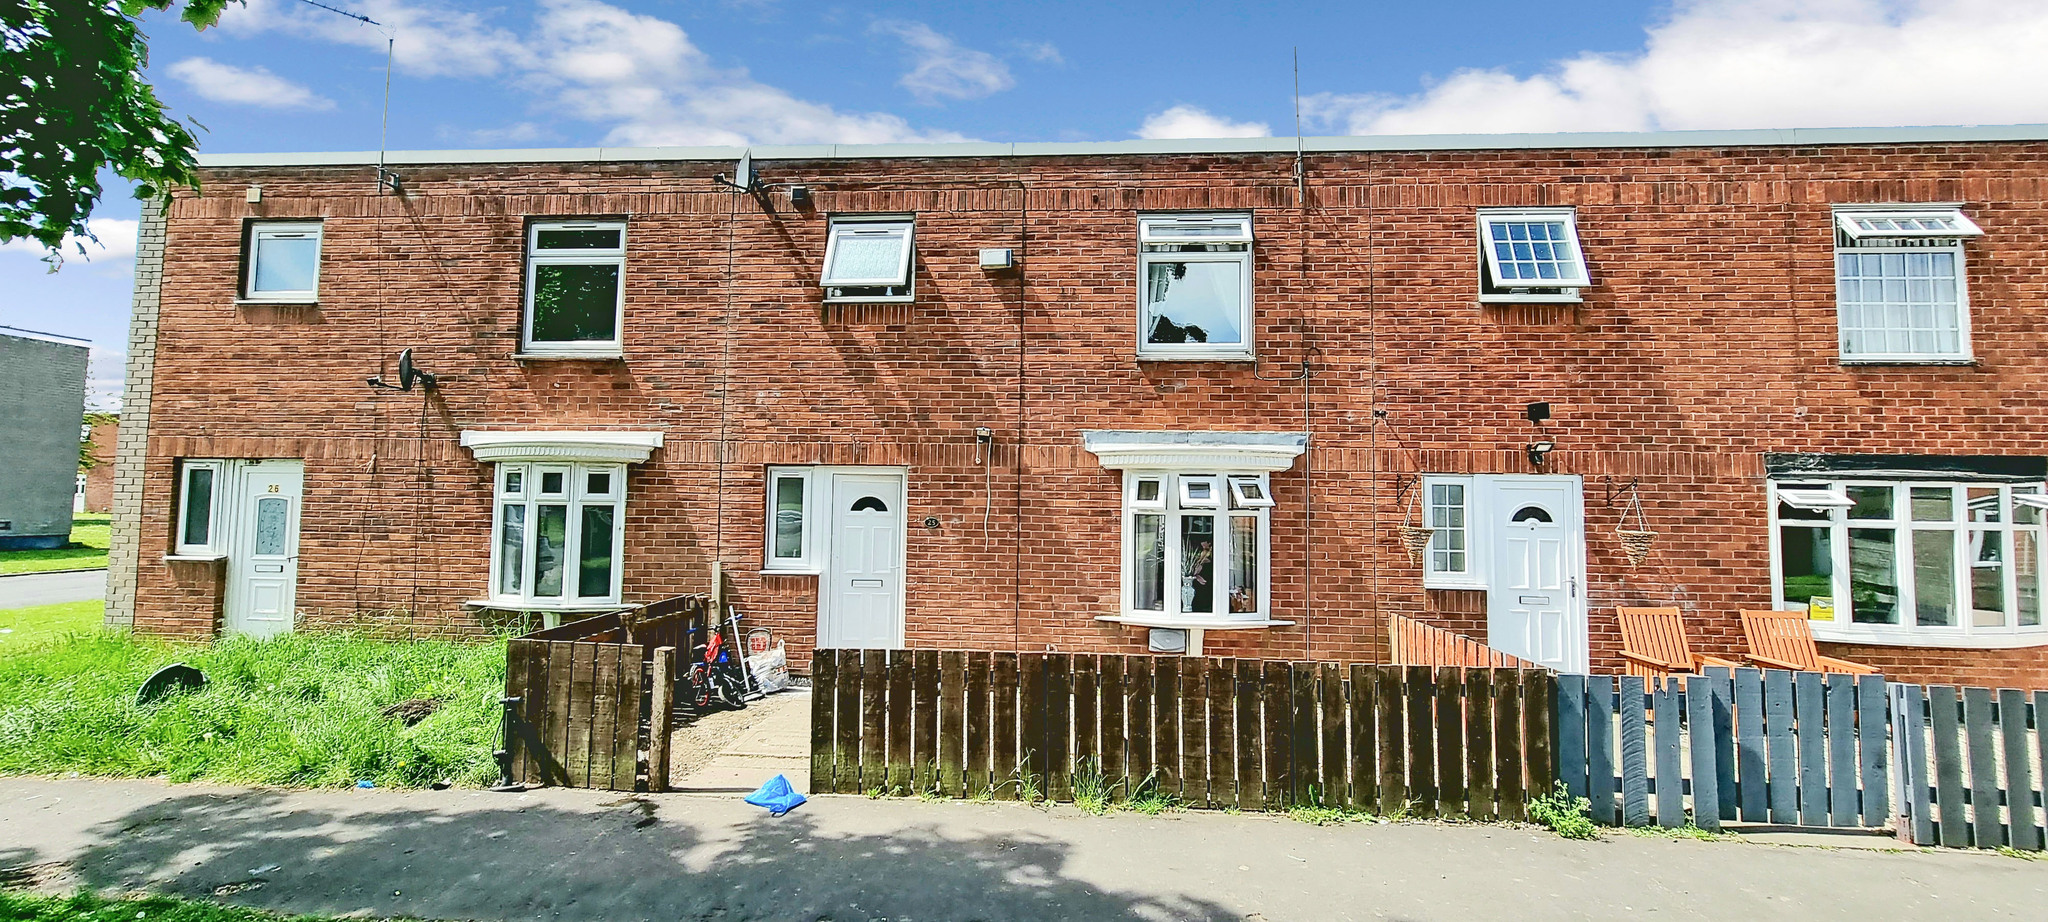 3 bed Terraced for rent in Newton Aycliffe. From Aycliffe Homes - Newton Aycliffe